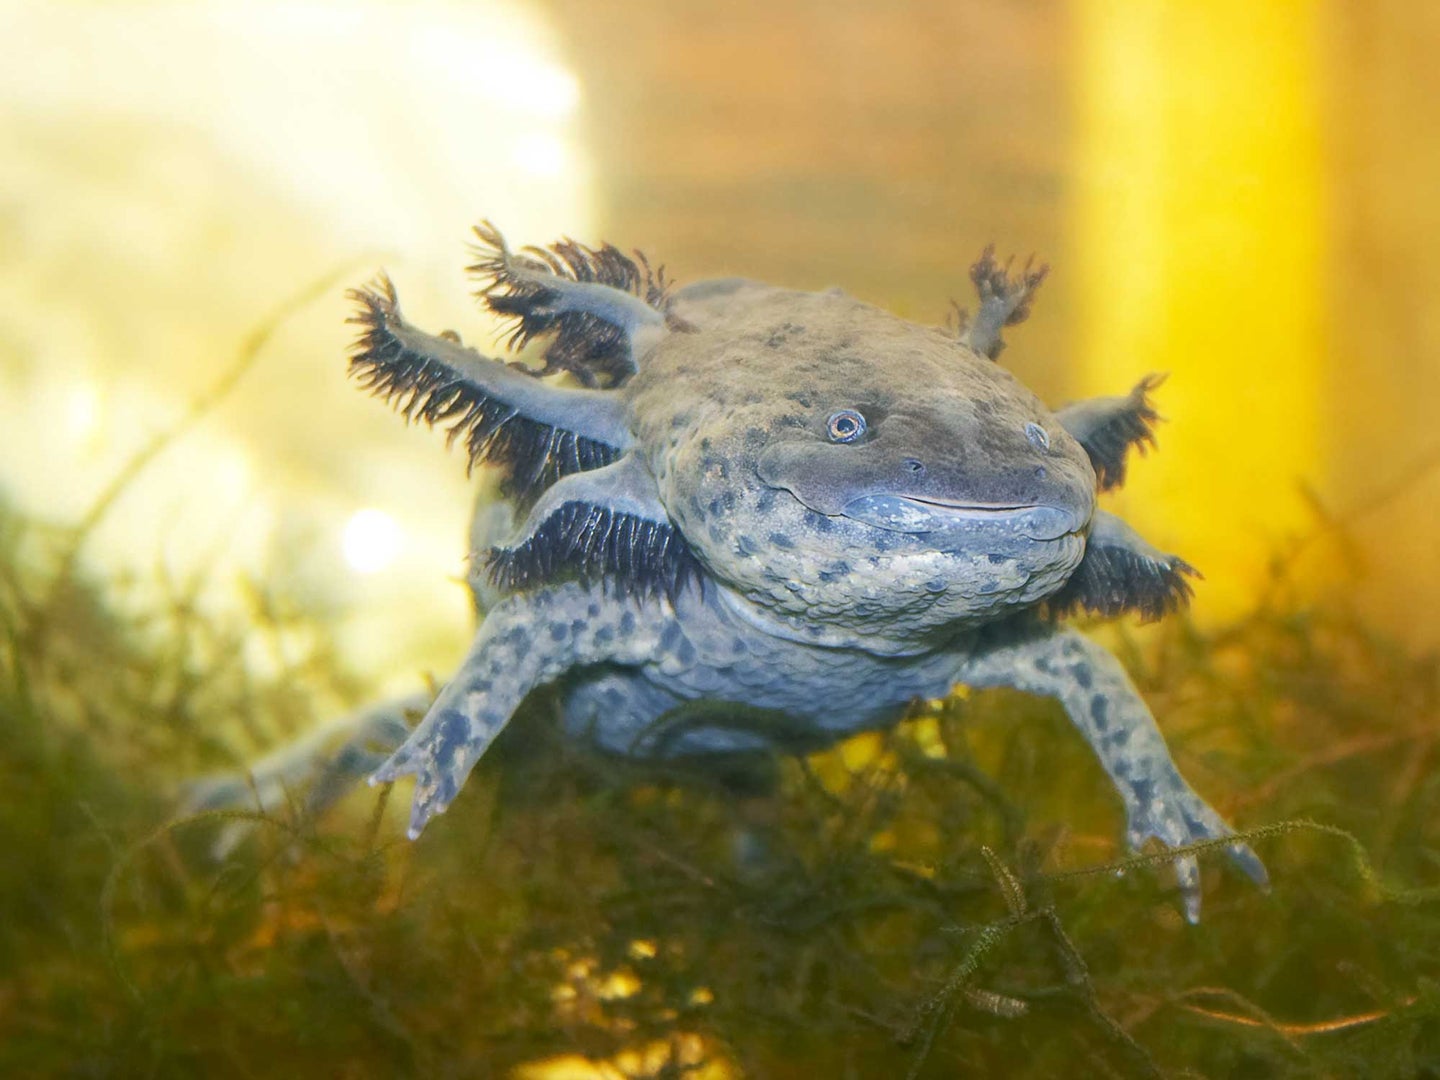 Researchers have long studied the axolotl’s extraordinary regenerative abilities in hopes of uncovering biological secrets that could one day help renew human tissue.